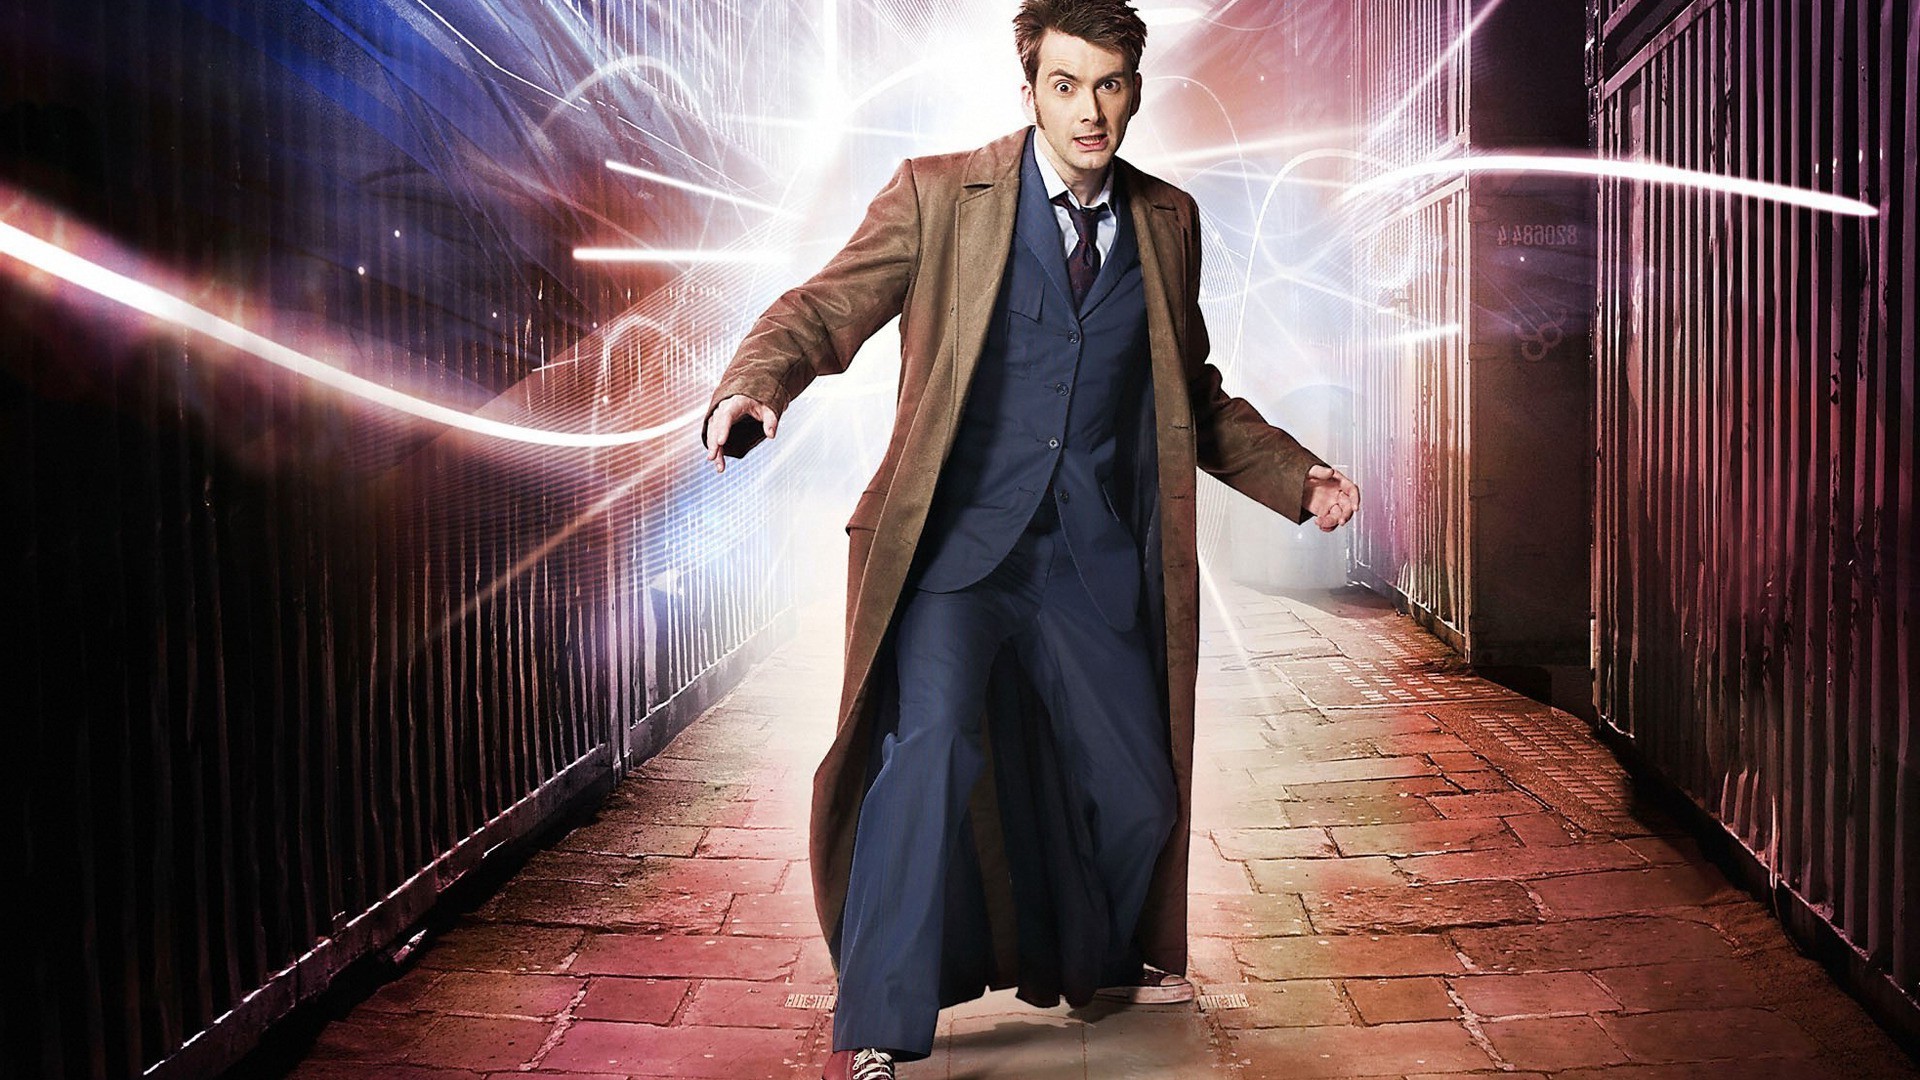 Doctor Who, The Doctor, David Tennant, Tenth Doctor Wallpapers HD / Desktop and Mobile Backgrounds